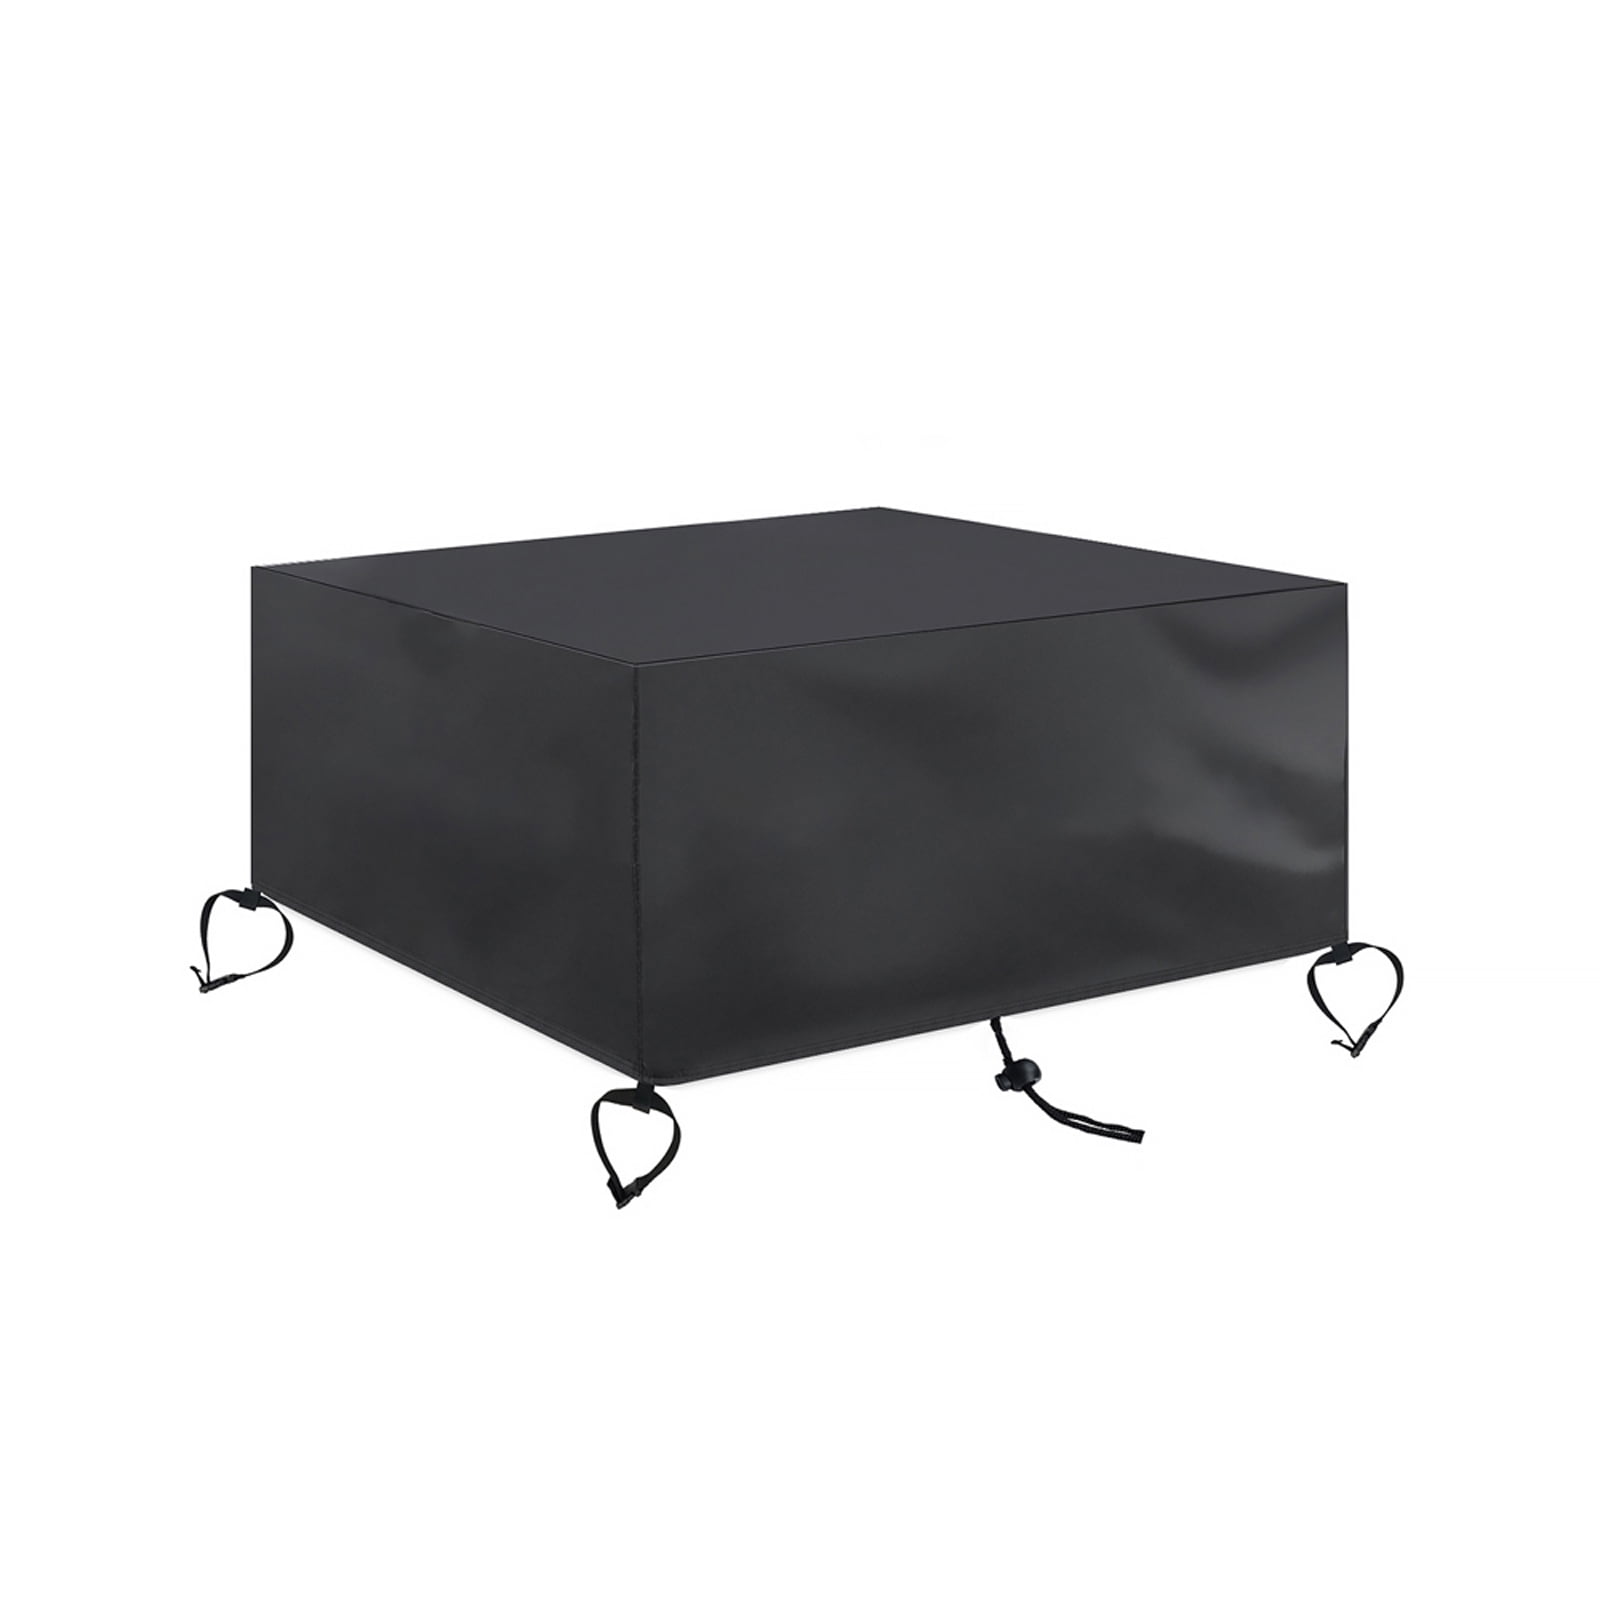 Gas Fire Cover Square 30x30x24 5 Inch, Square Fire Pit Cover 30 X 30